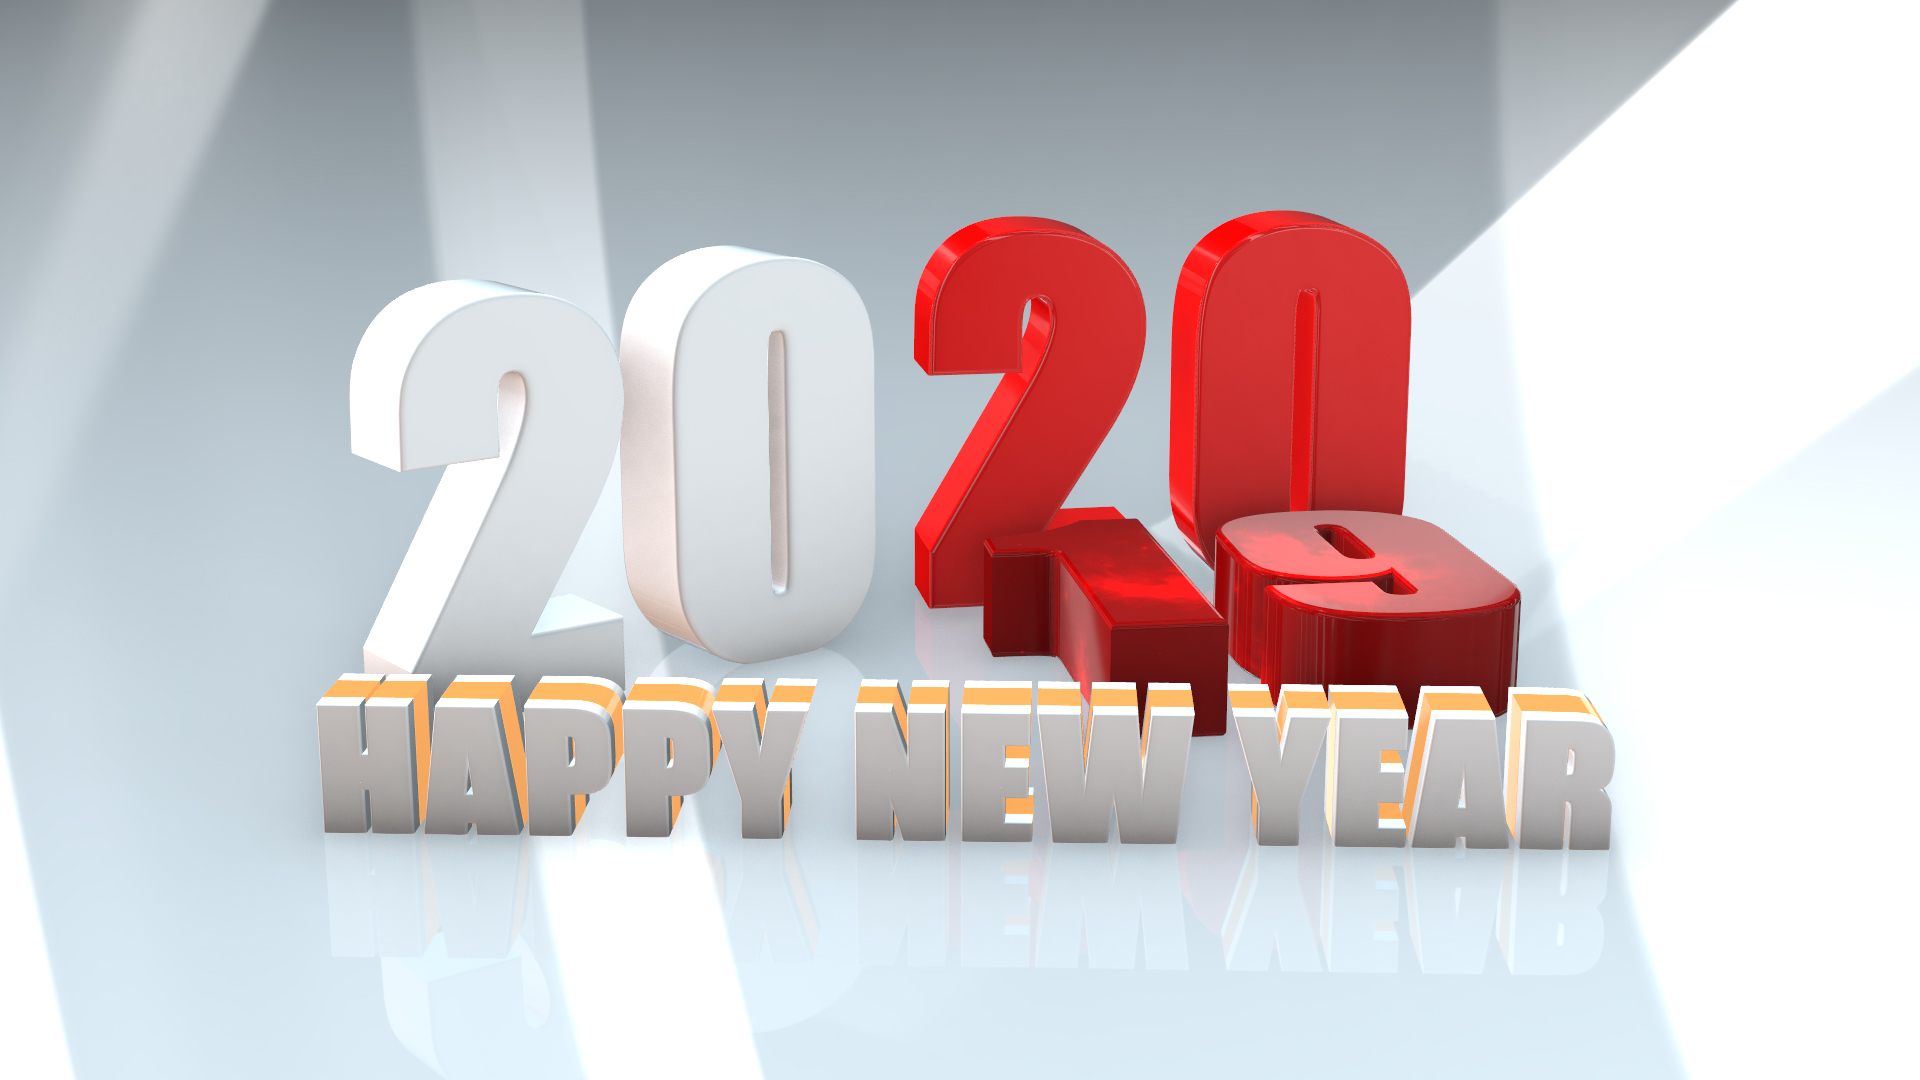 Happy New Year 2020 Images HD Free Download